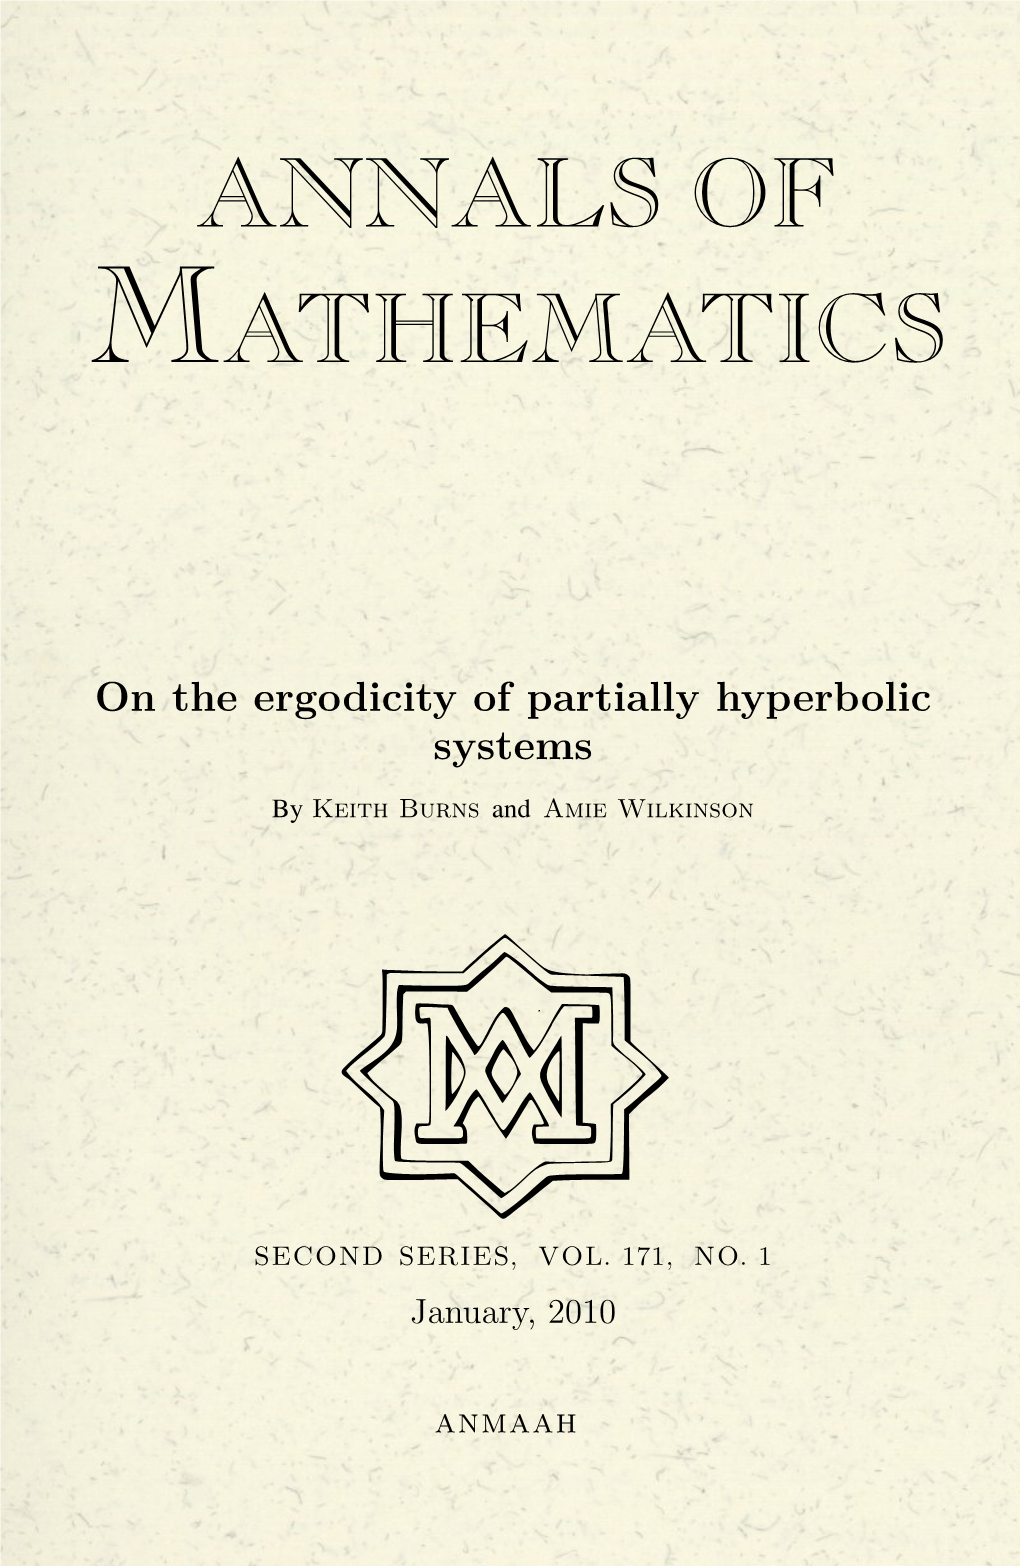 On the Ergodicity of Partially Hyperbolic Systems